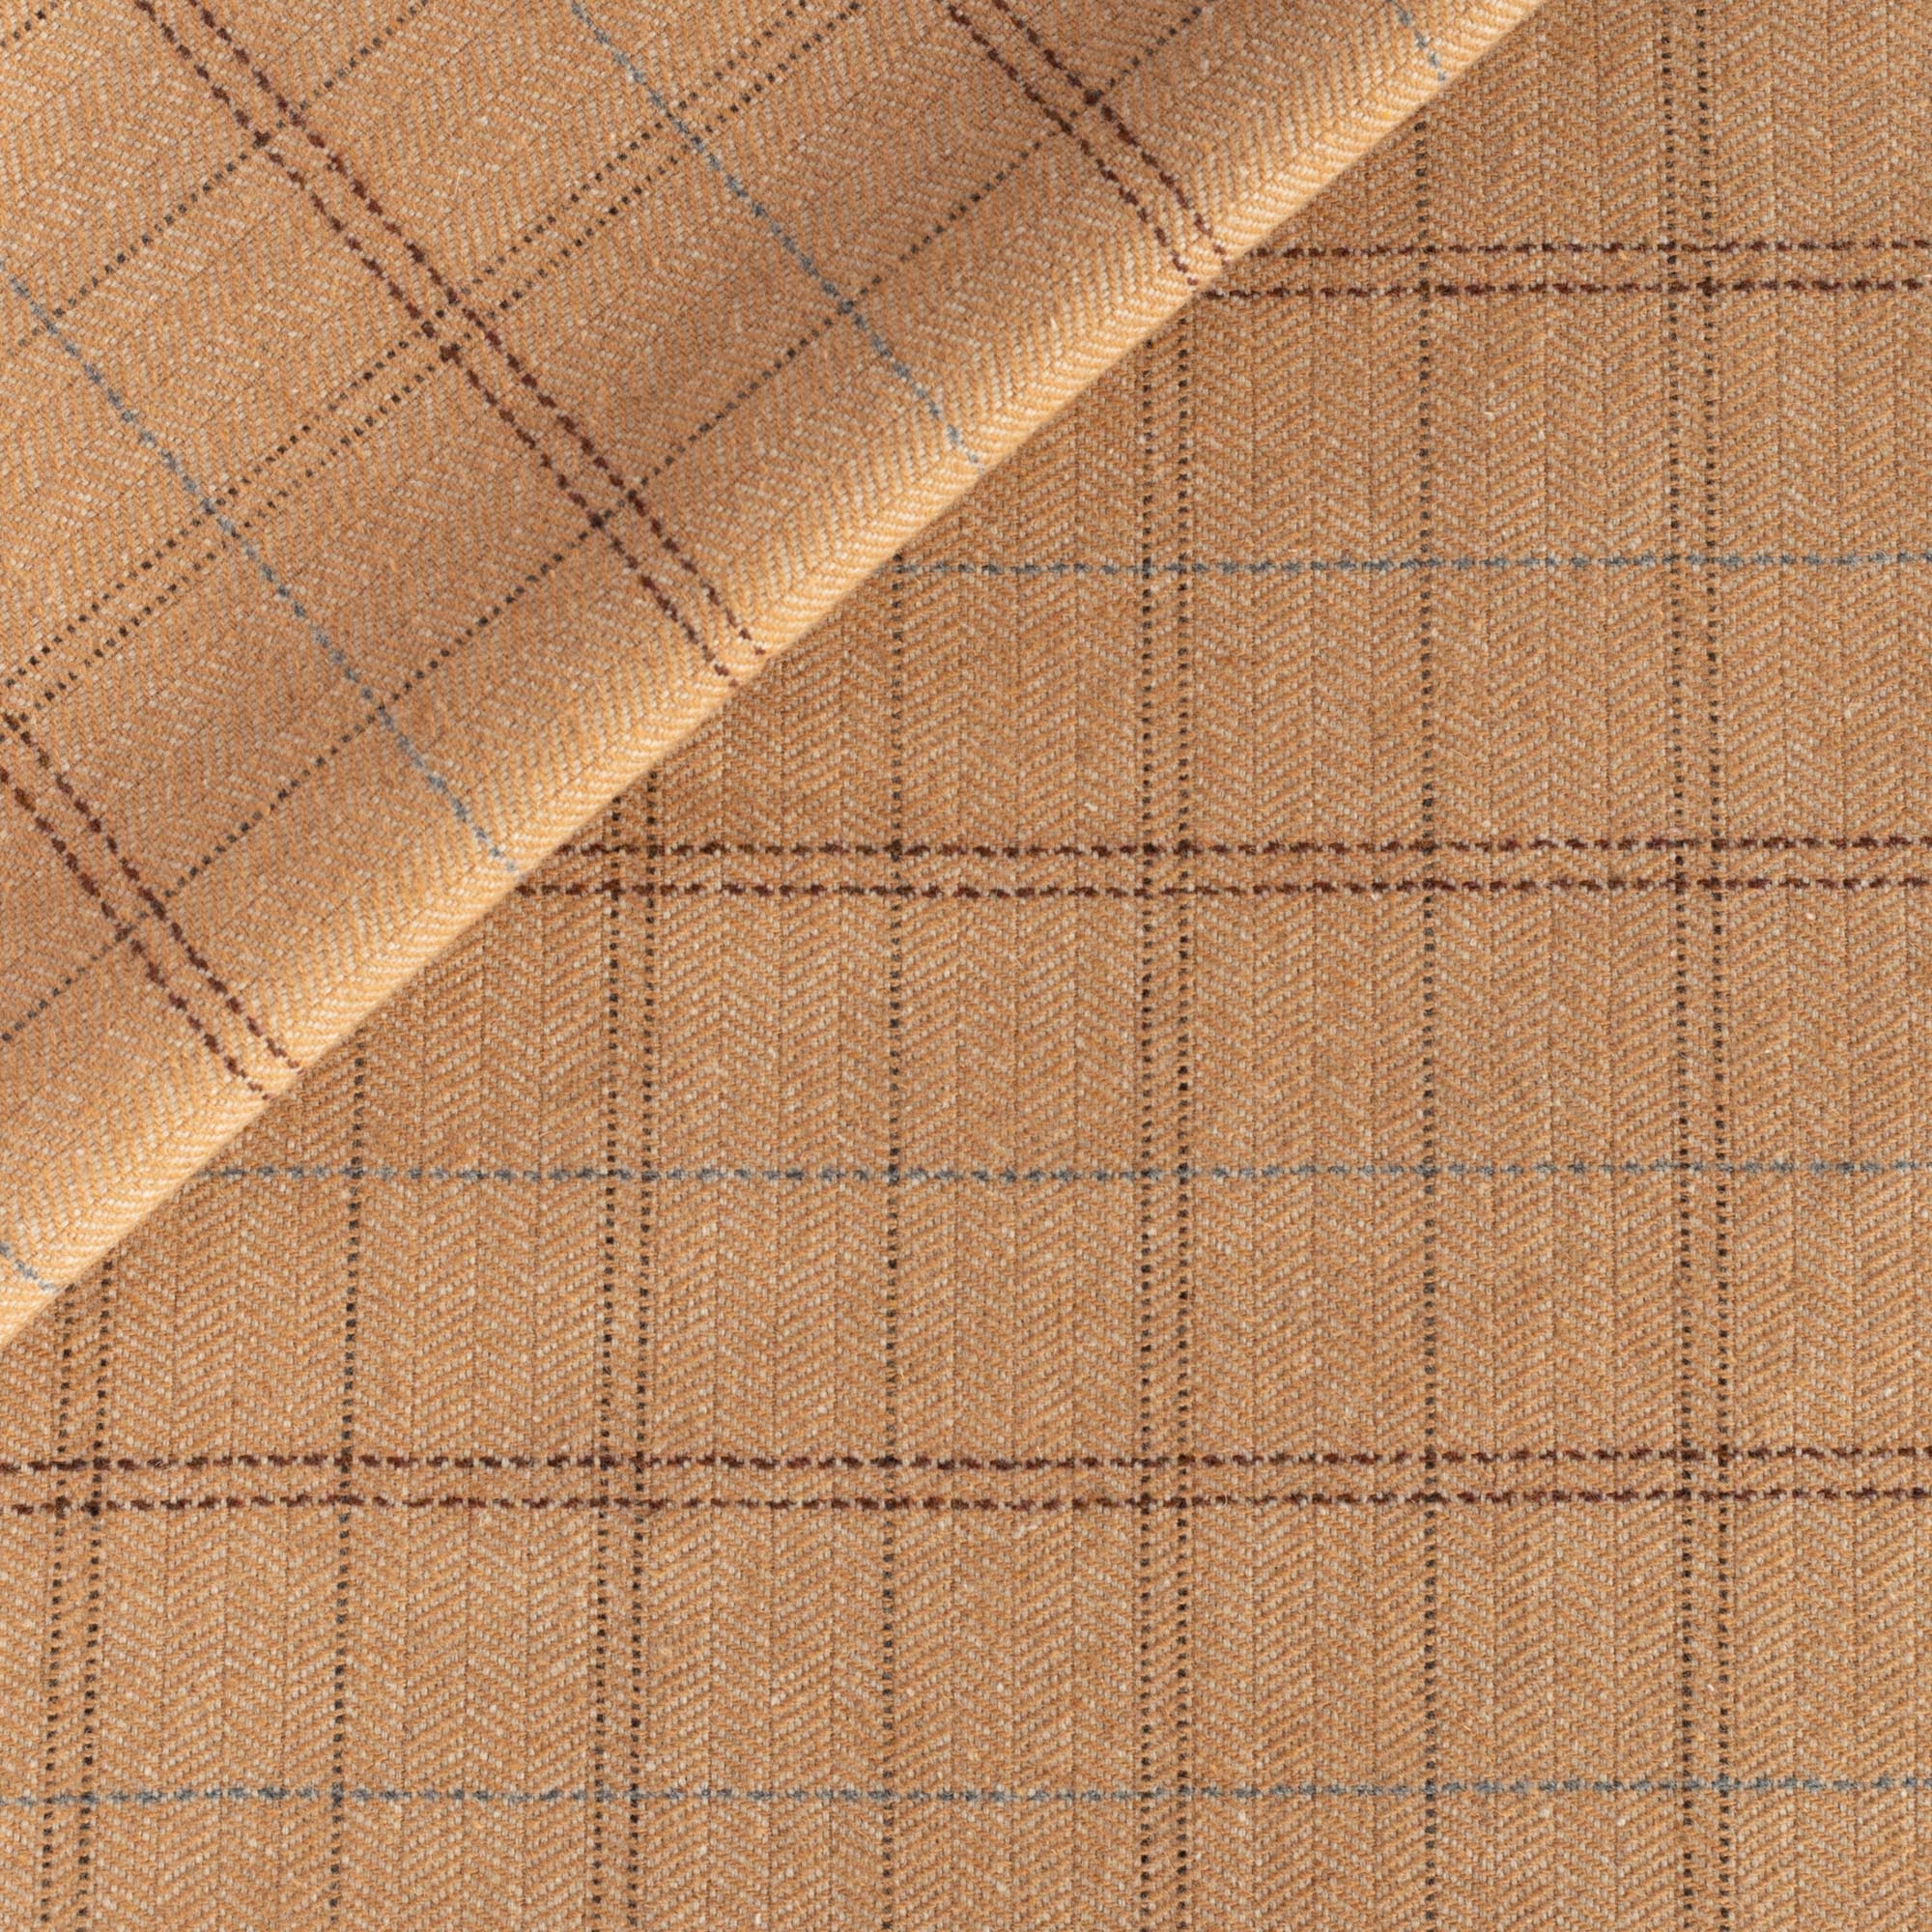 Fabrics and Textiles: Houndstooth Check - The Cutting Class